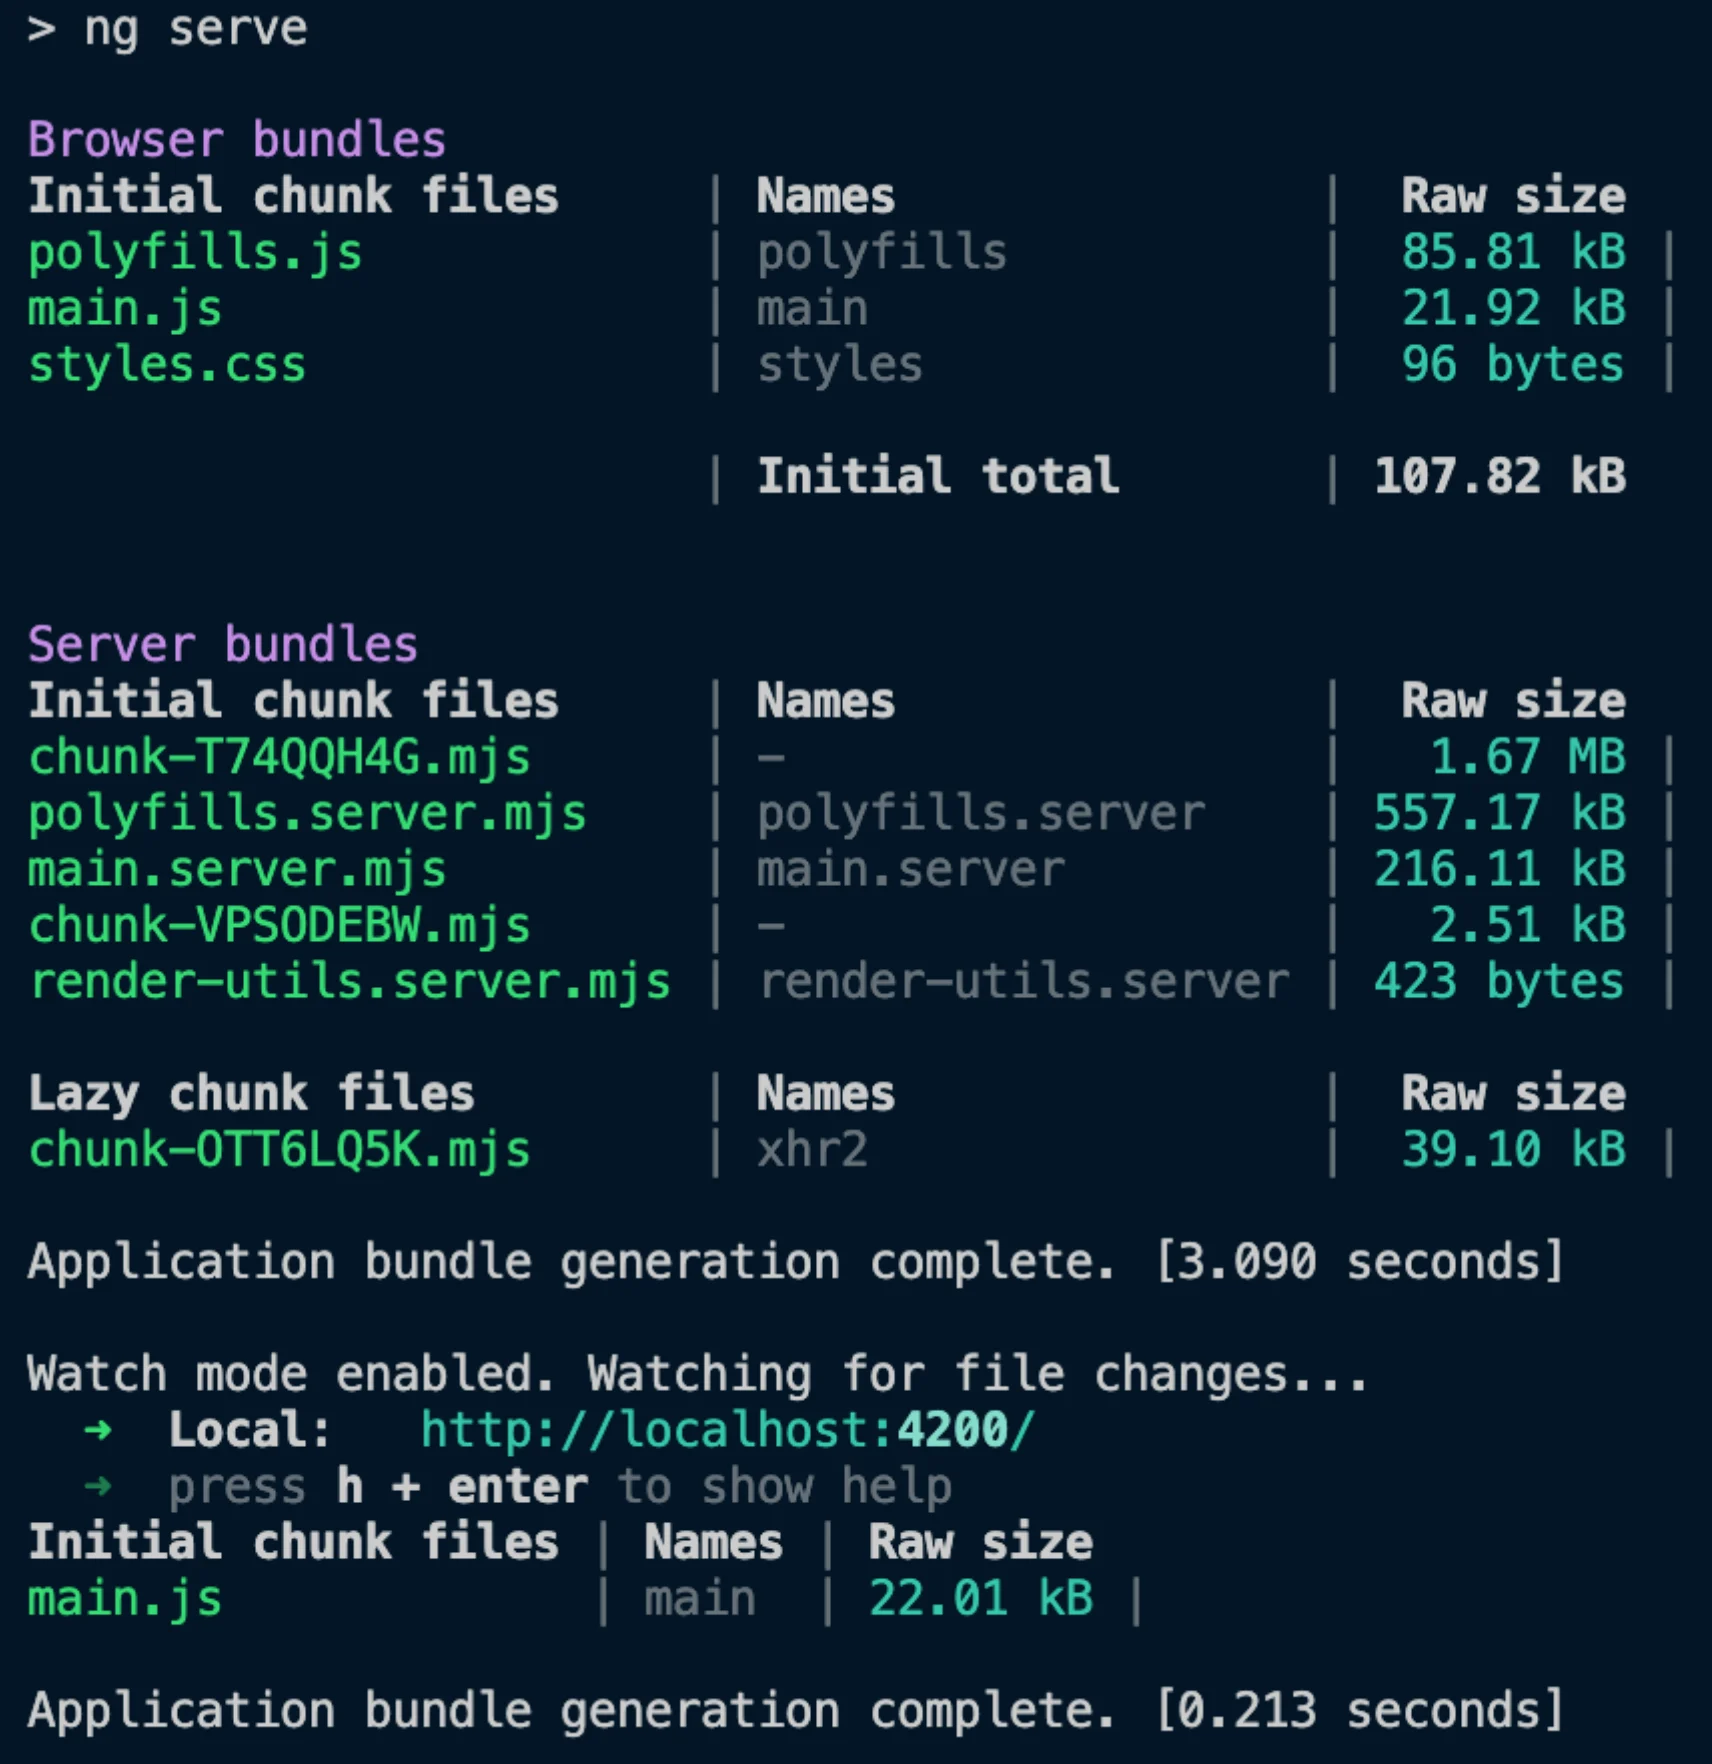 Screenshot from terminal with stats about generated server and browser bundles.